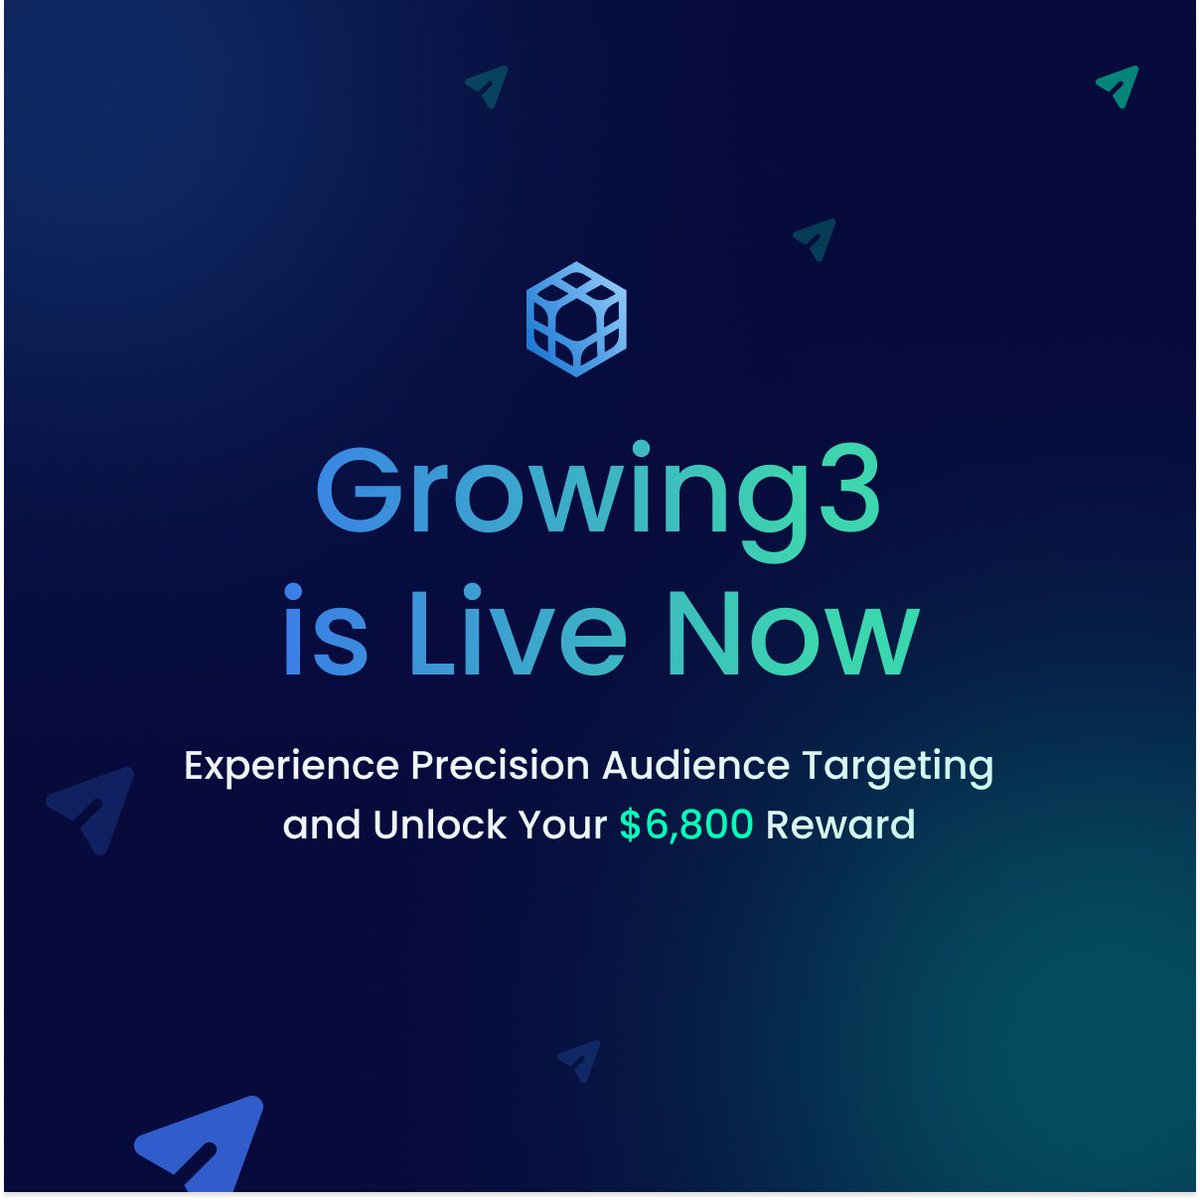 Growing3 Beta is officially live!
Experience Precision Audience Targeting and Unlock Your $6,800 Reward!

Try Now: growing3.ai/product/beta_c…
Get Help: t.me/growing3_beta_…